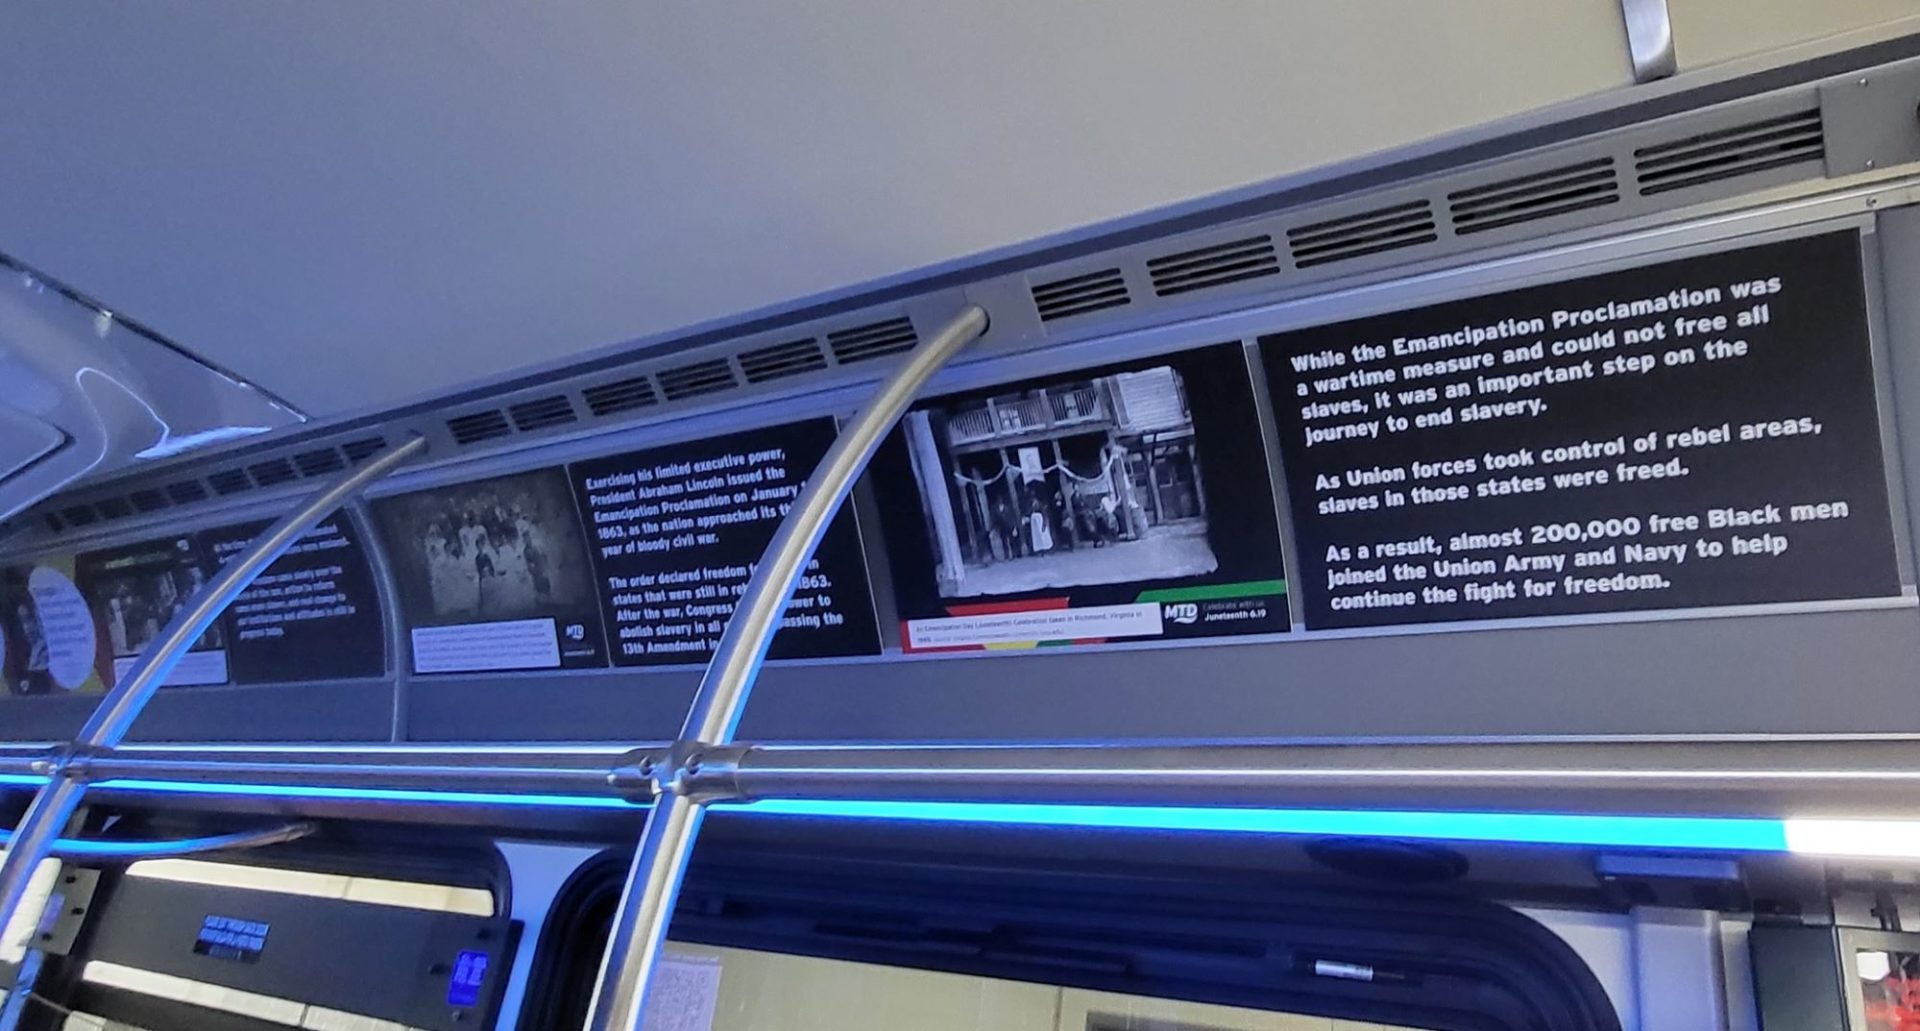 Panels on the interior of a bus that have information about Juneteenth. They have a black background and white text, with a black and white photo.